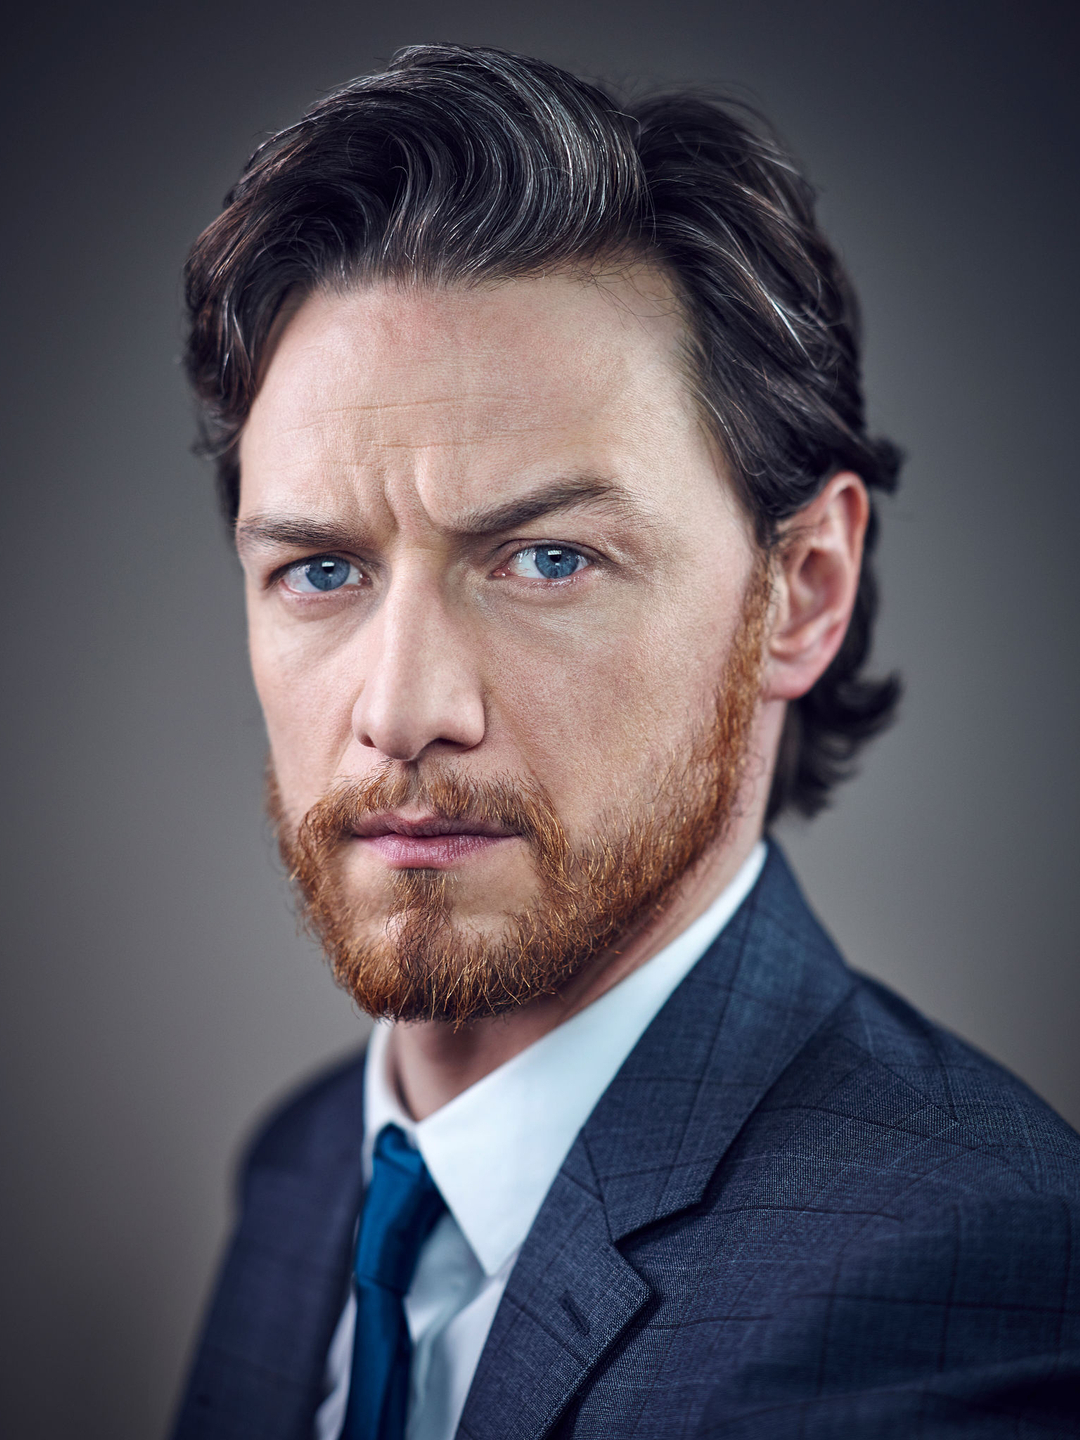 James McAvoy personal life